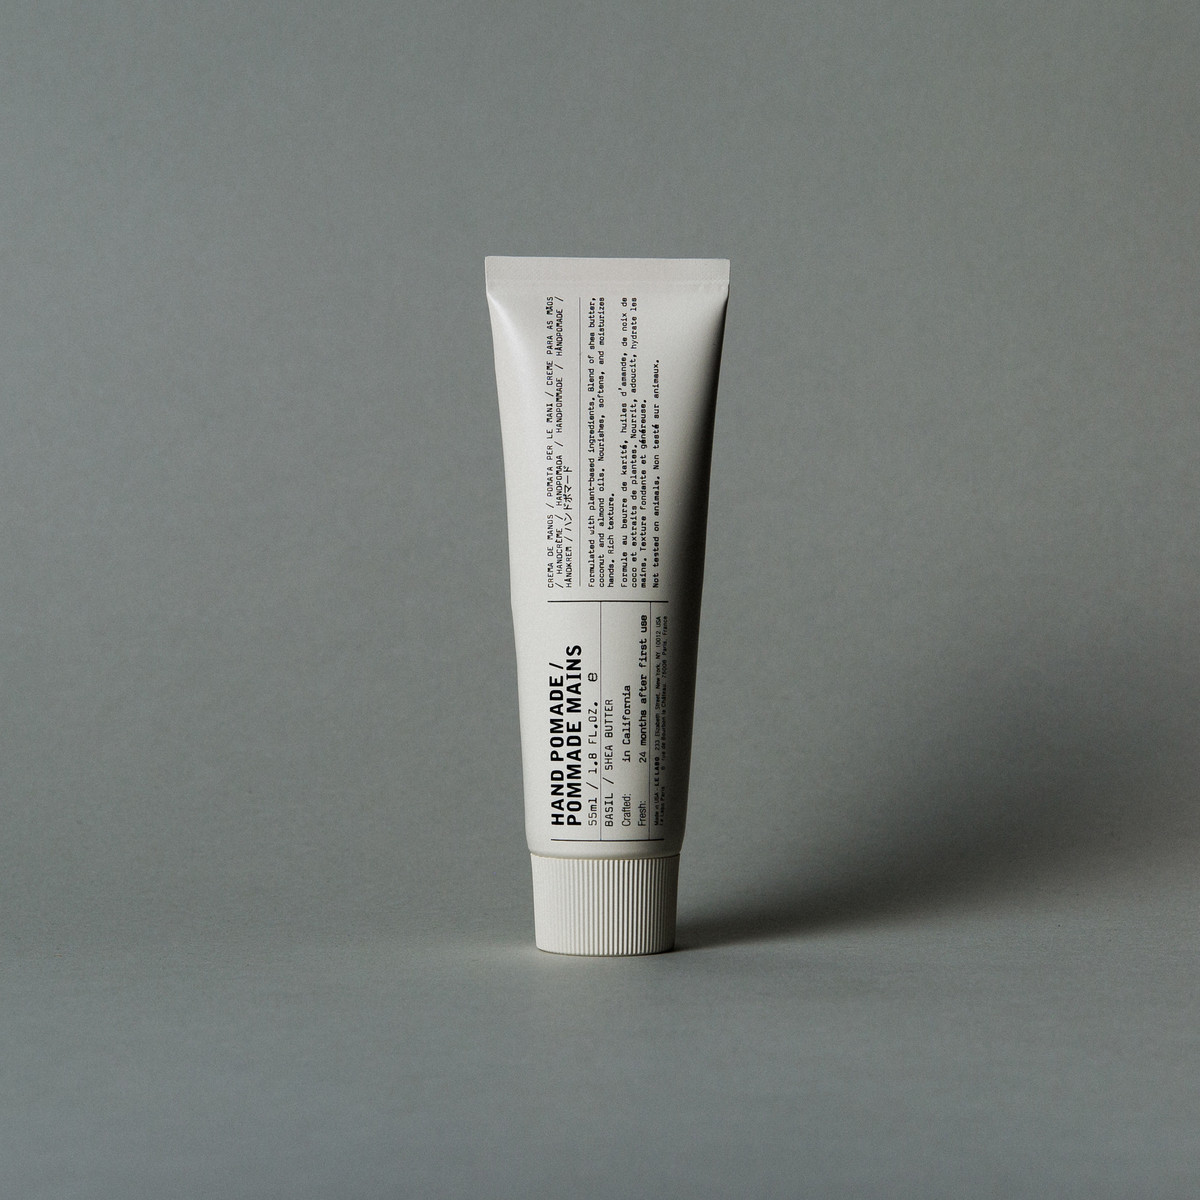 Le Labo Add More Plant Based Goodies To Their Skincare Line